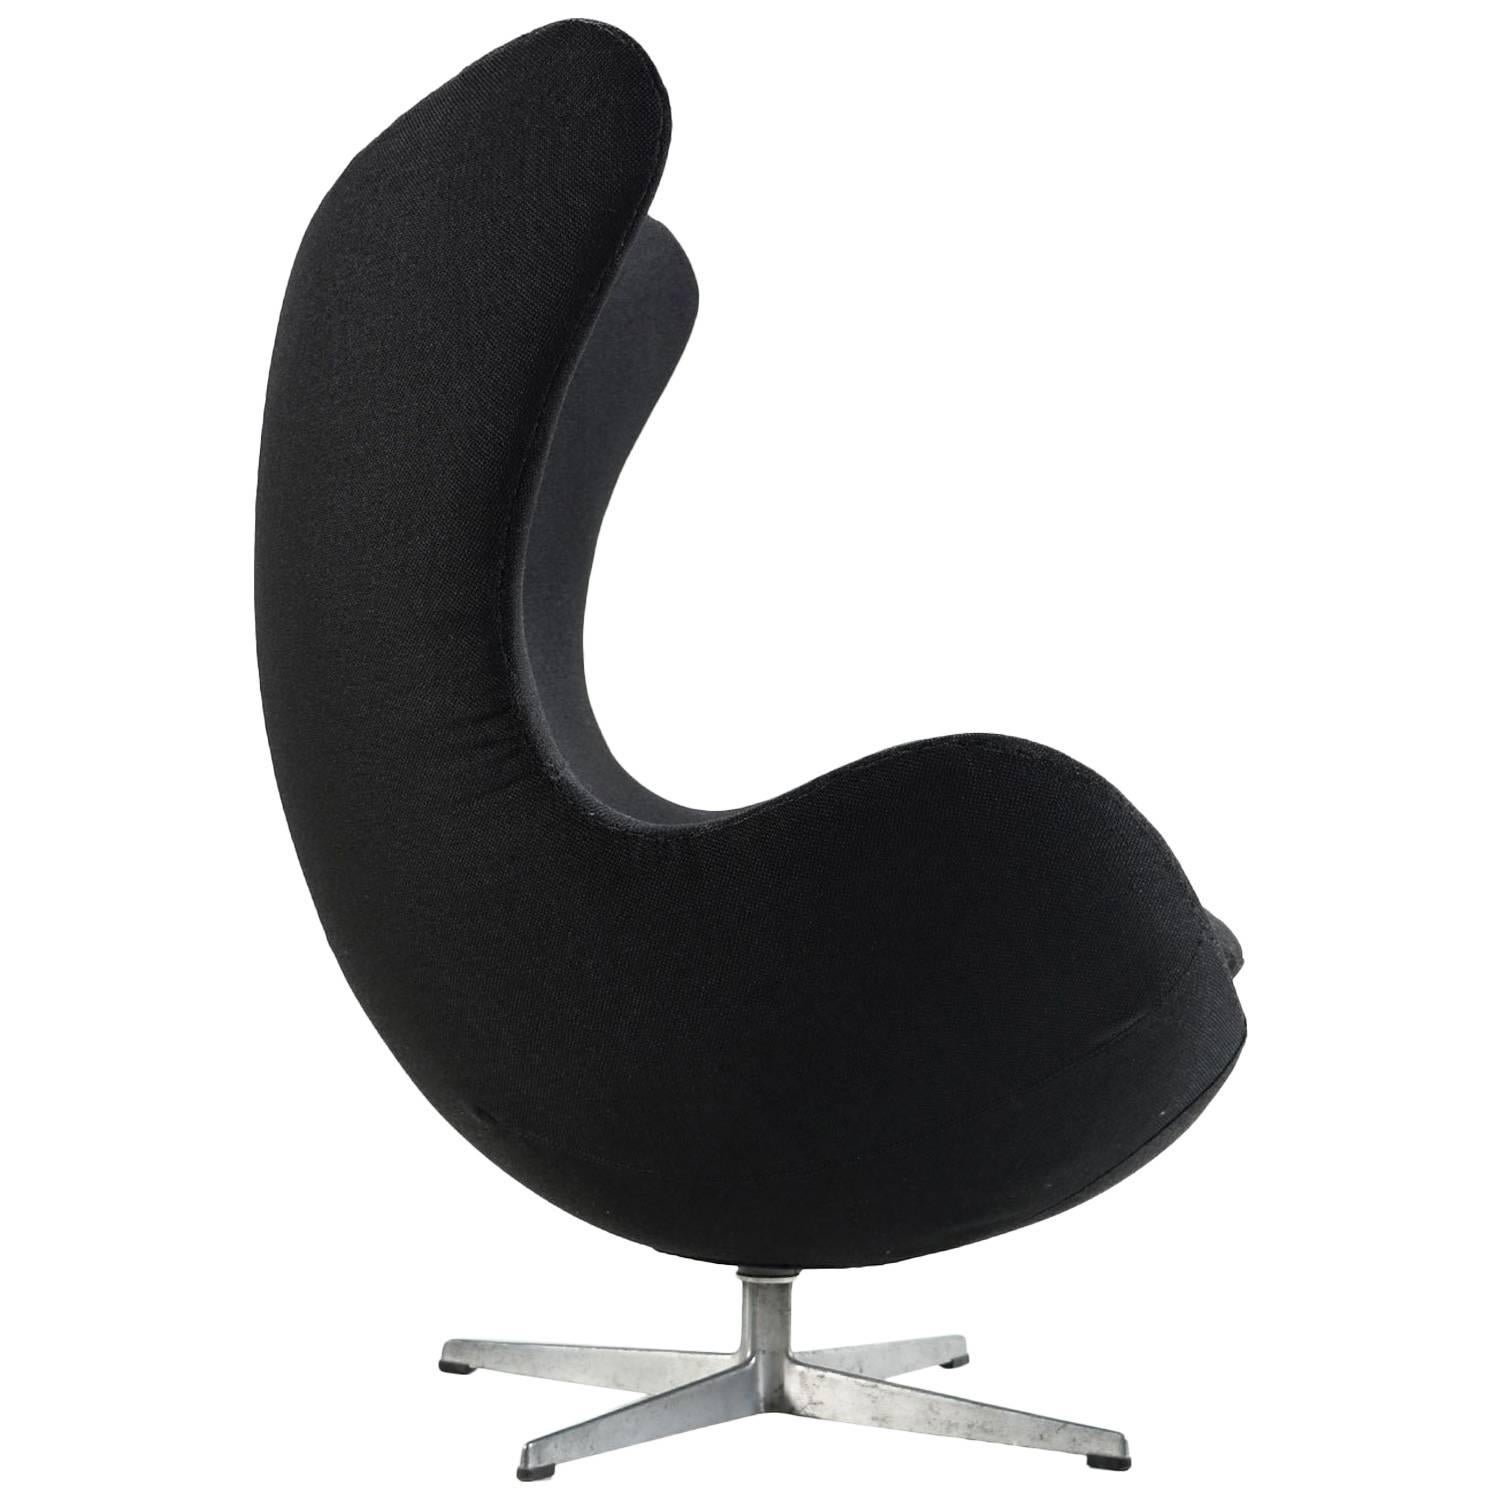 Authentic Mid-Century Modern Arne Jacobsen for Fritz Hansen Egg chair. The chair has been restored with new padding covering the original shell and new upholstery. The base bears the maker's mark. Covered in new black fabric, this chair is certain